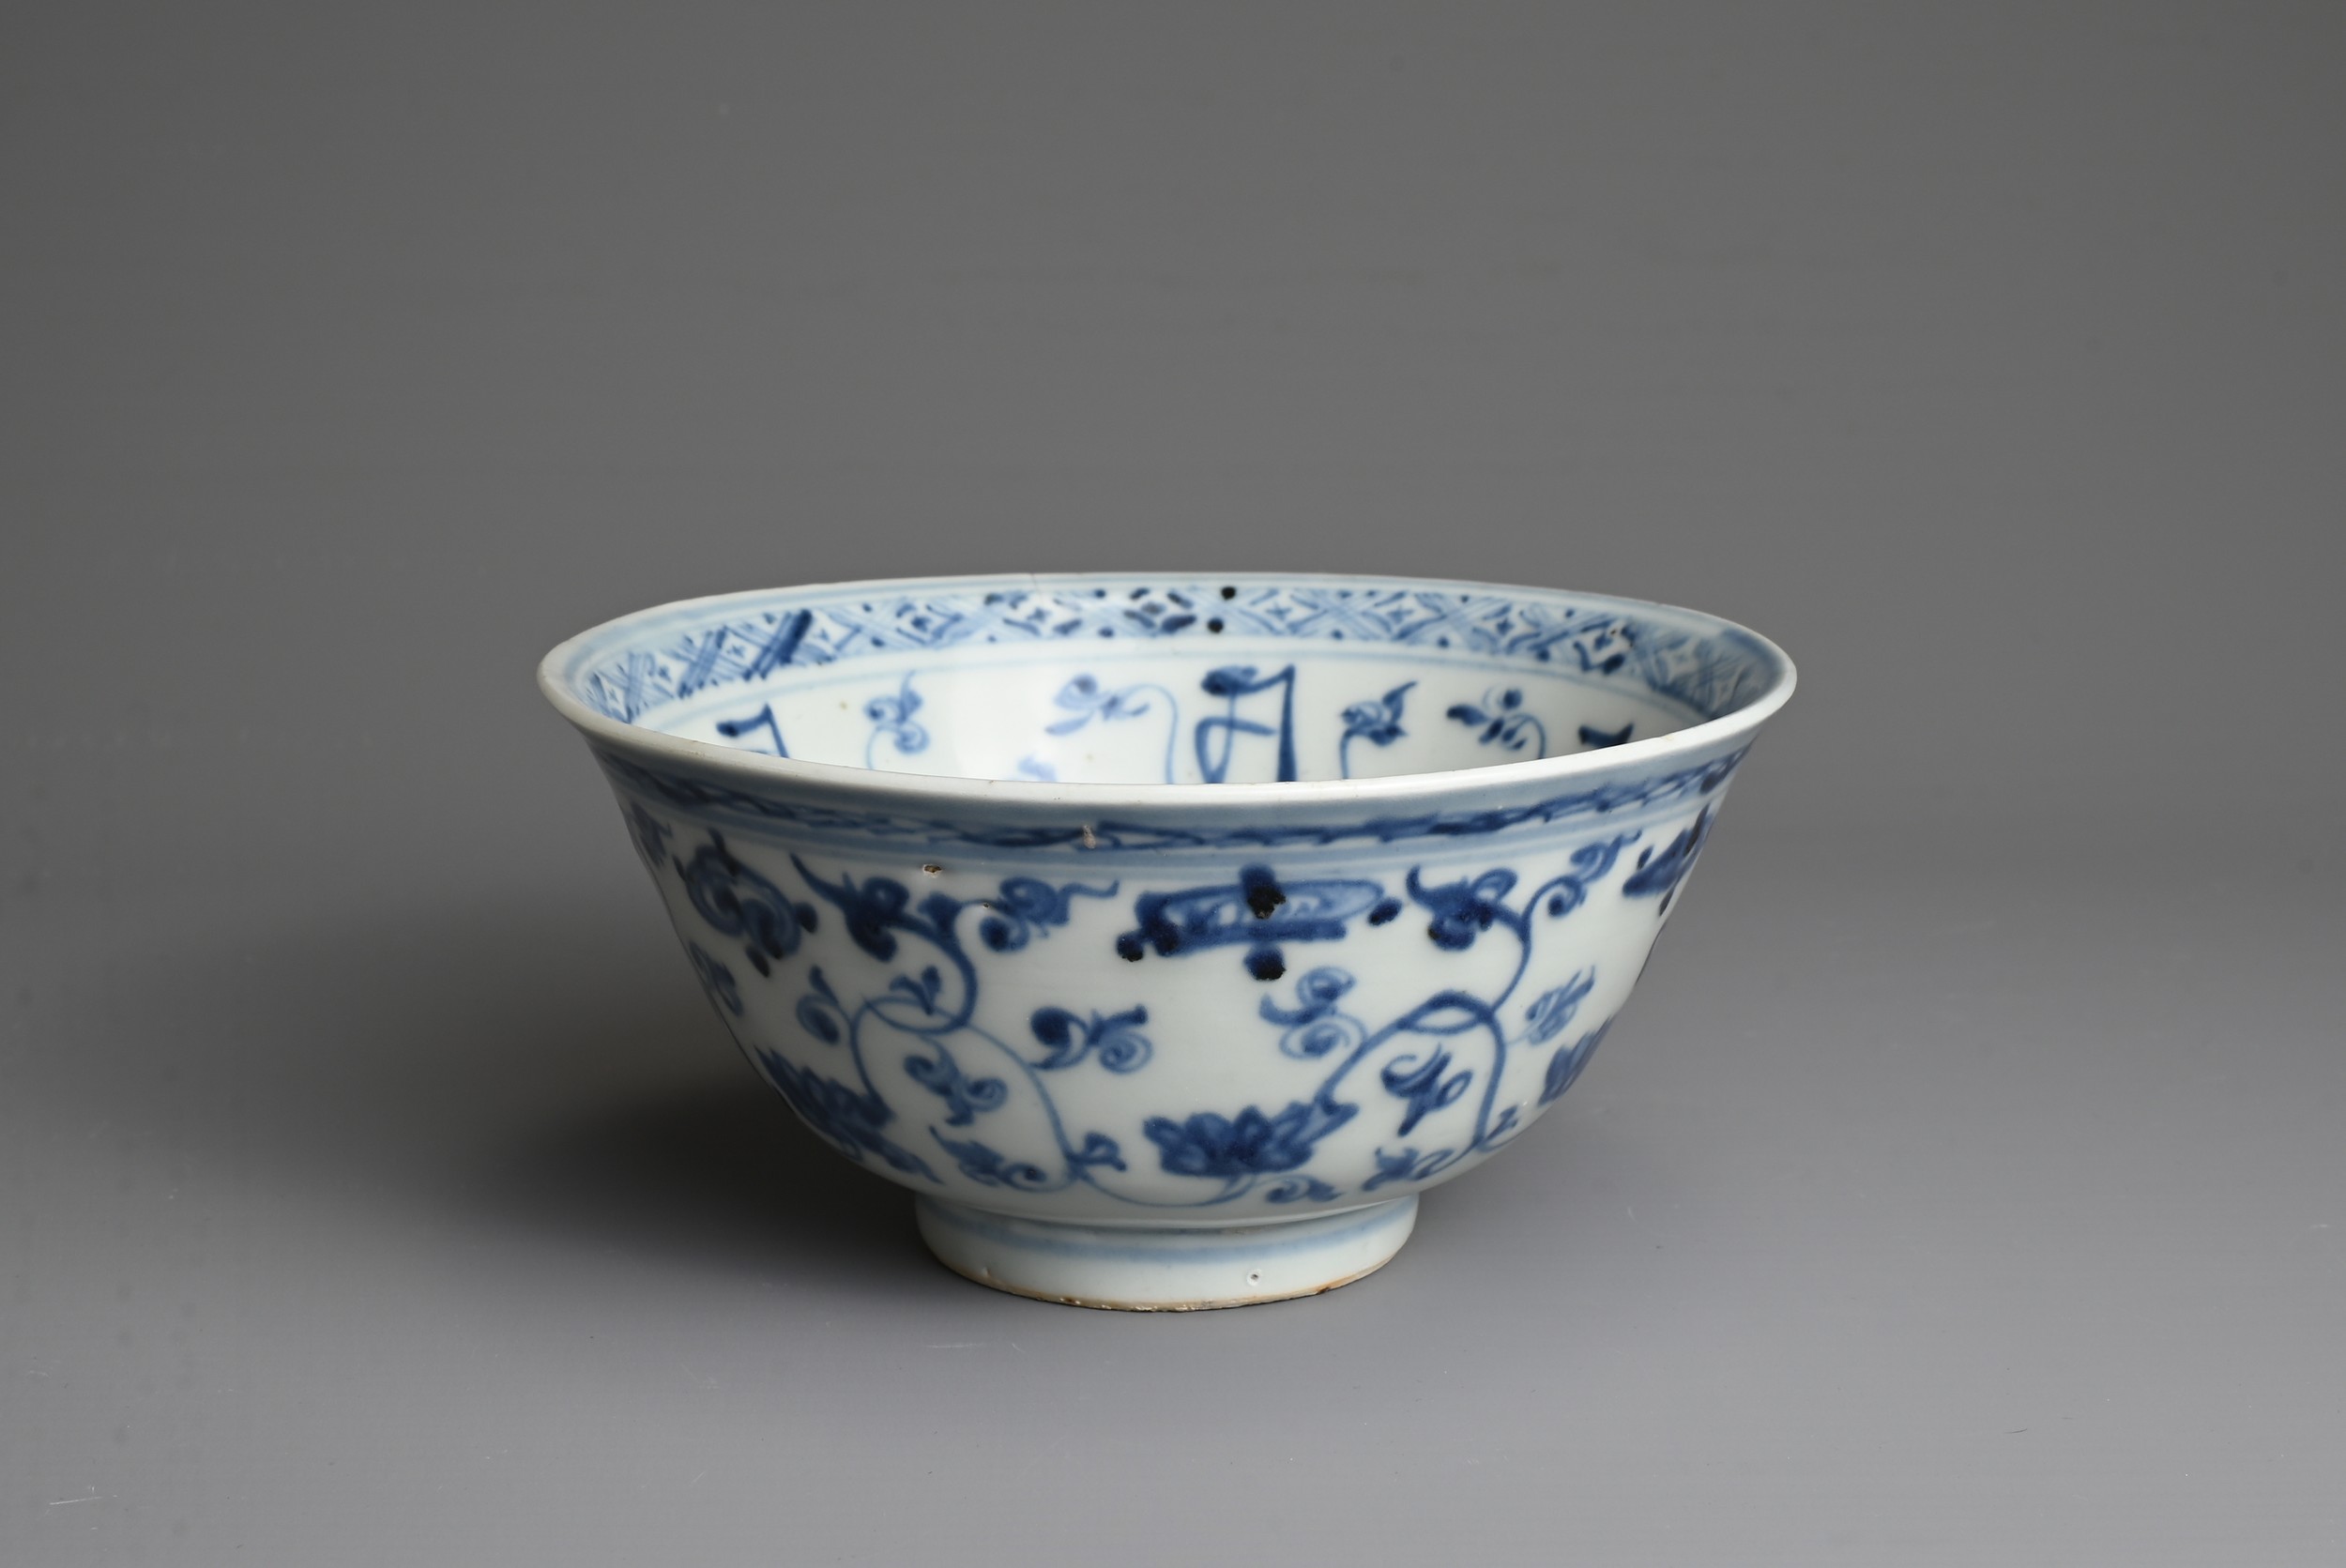 A CHINESE BLUE AND WHITE PORCELAIN BOWL, MING DYNASTY. Decorated with lotus scrolls and Buddhist - Image 2 of 7